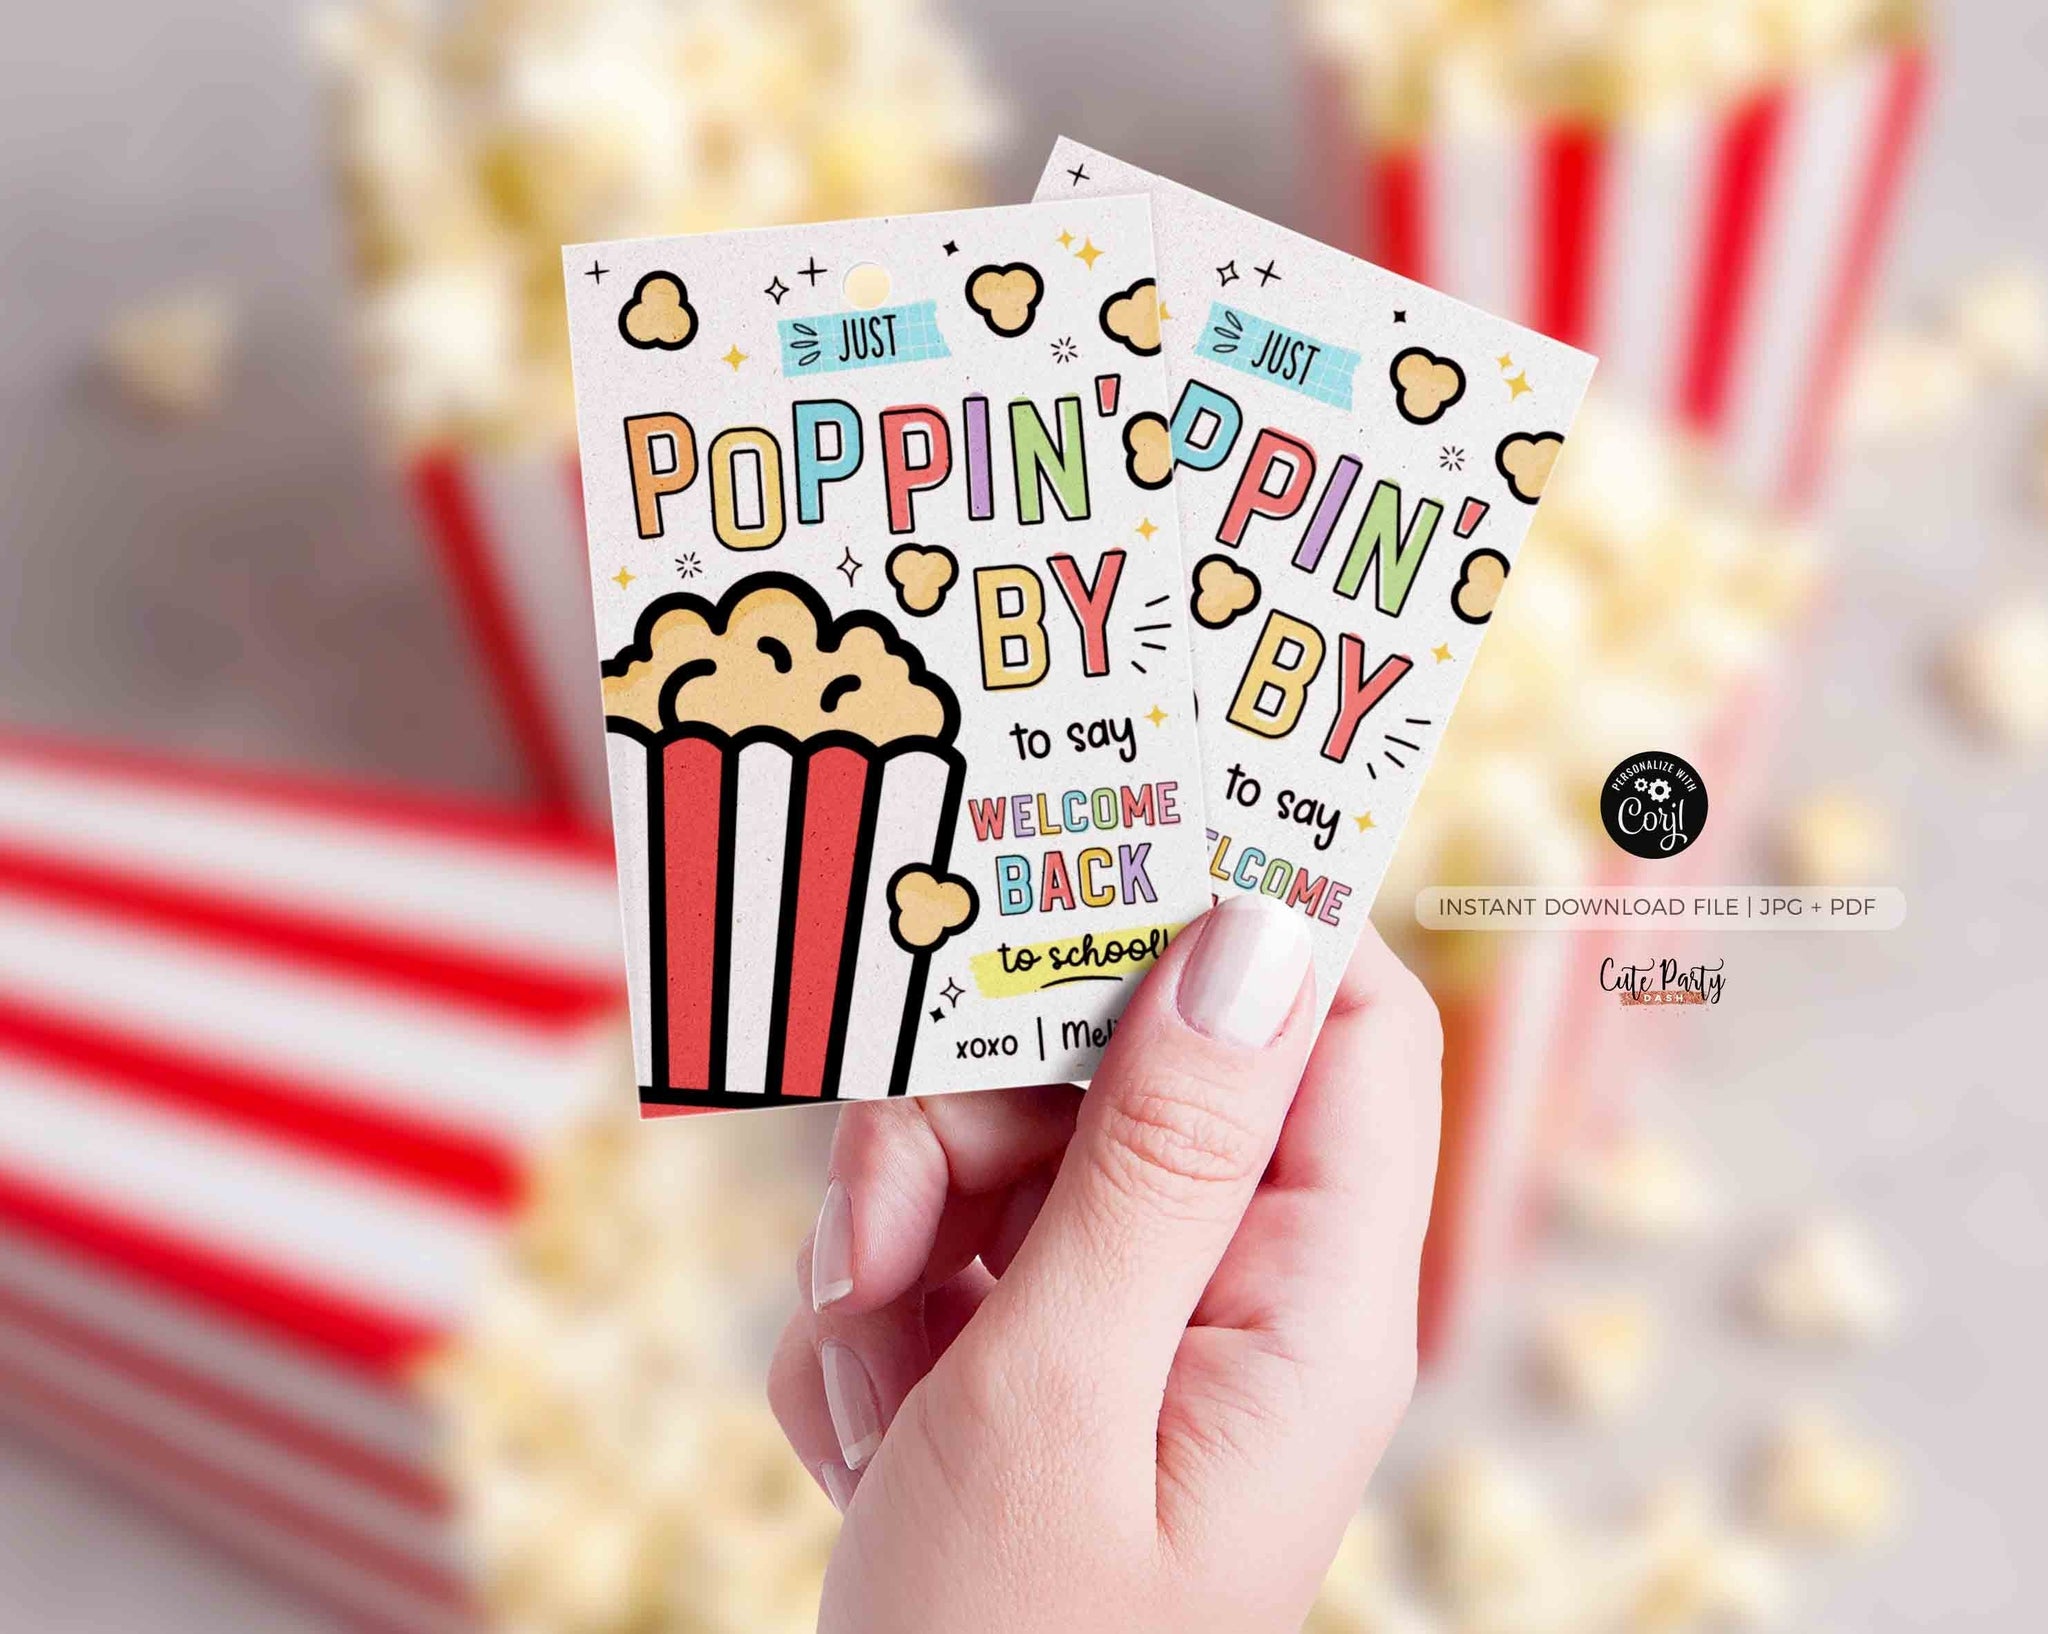 Popcorn Welcome Back To School Gift Tag EDITABLE First Day of School gift Teacher Classmate Gift Poppin' by Tag Pop by card INSTANT DOWNLOAD